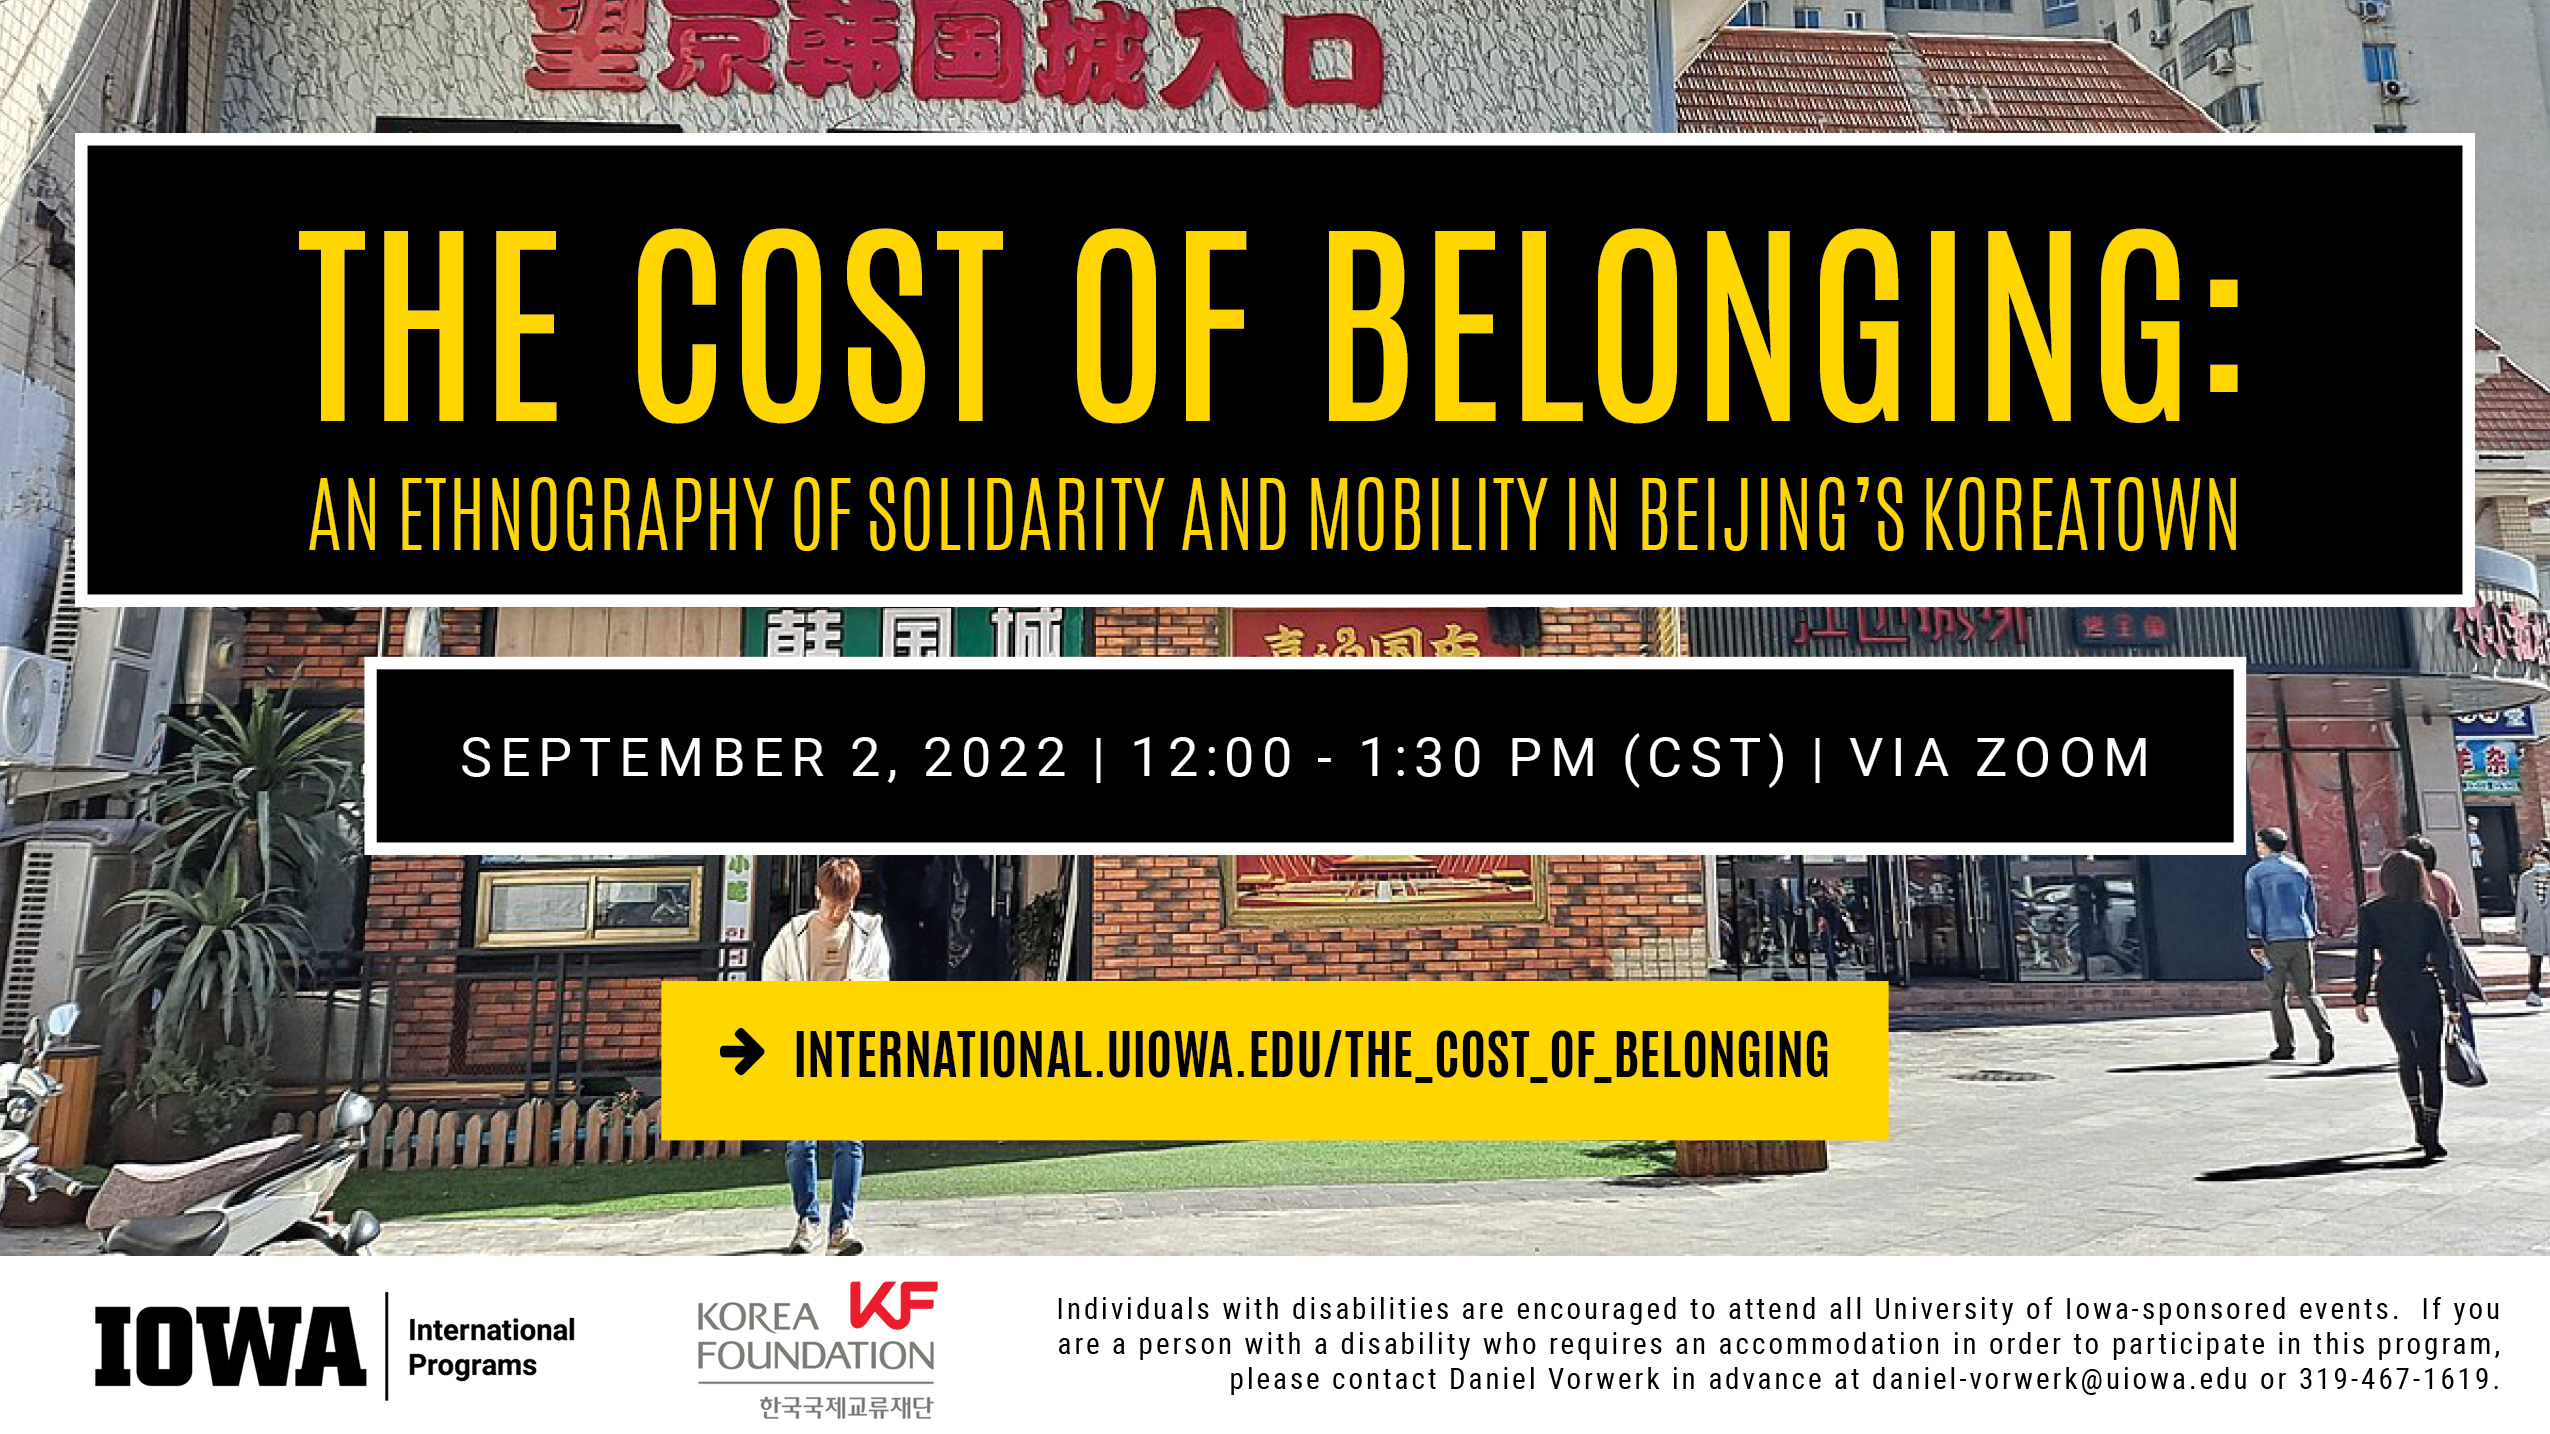 The Cost of Belonging: An Ethnography of Solidarity and Moblility in Bejing's Koreatown: Sept. 2 @ 12pm on Zoom